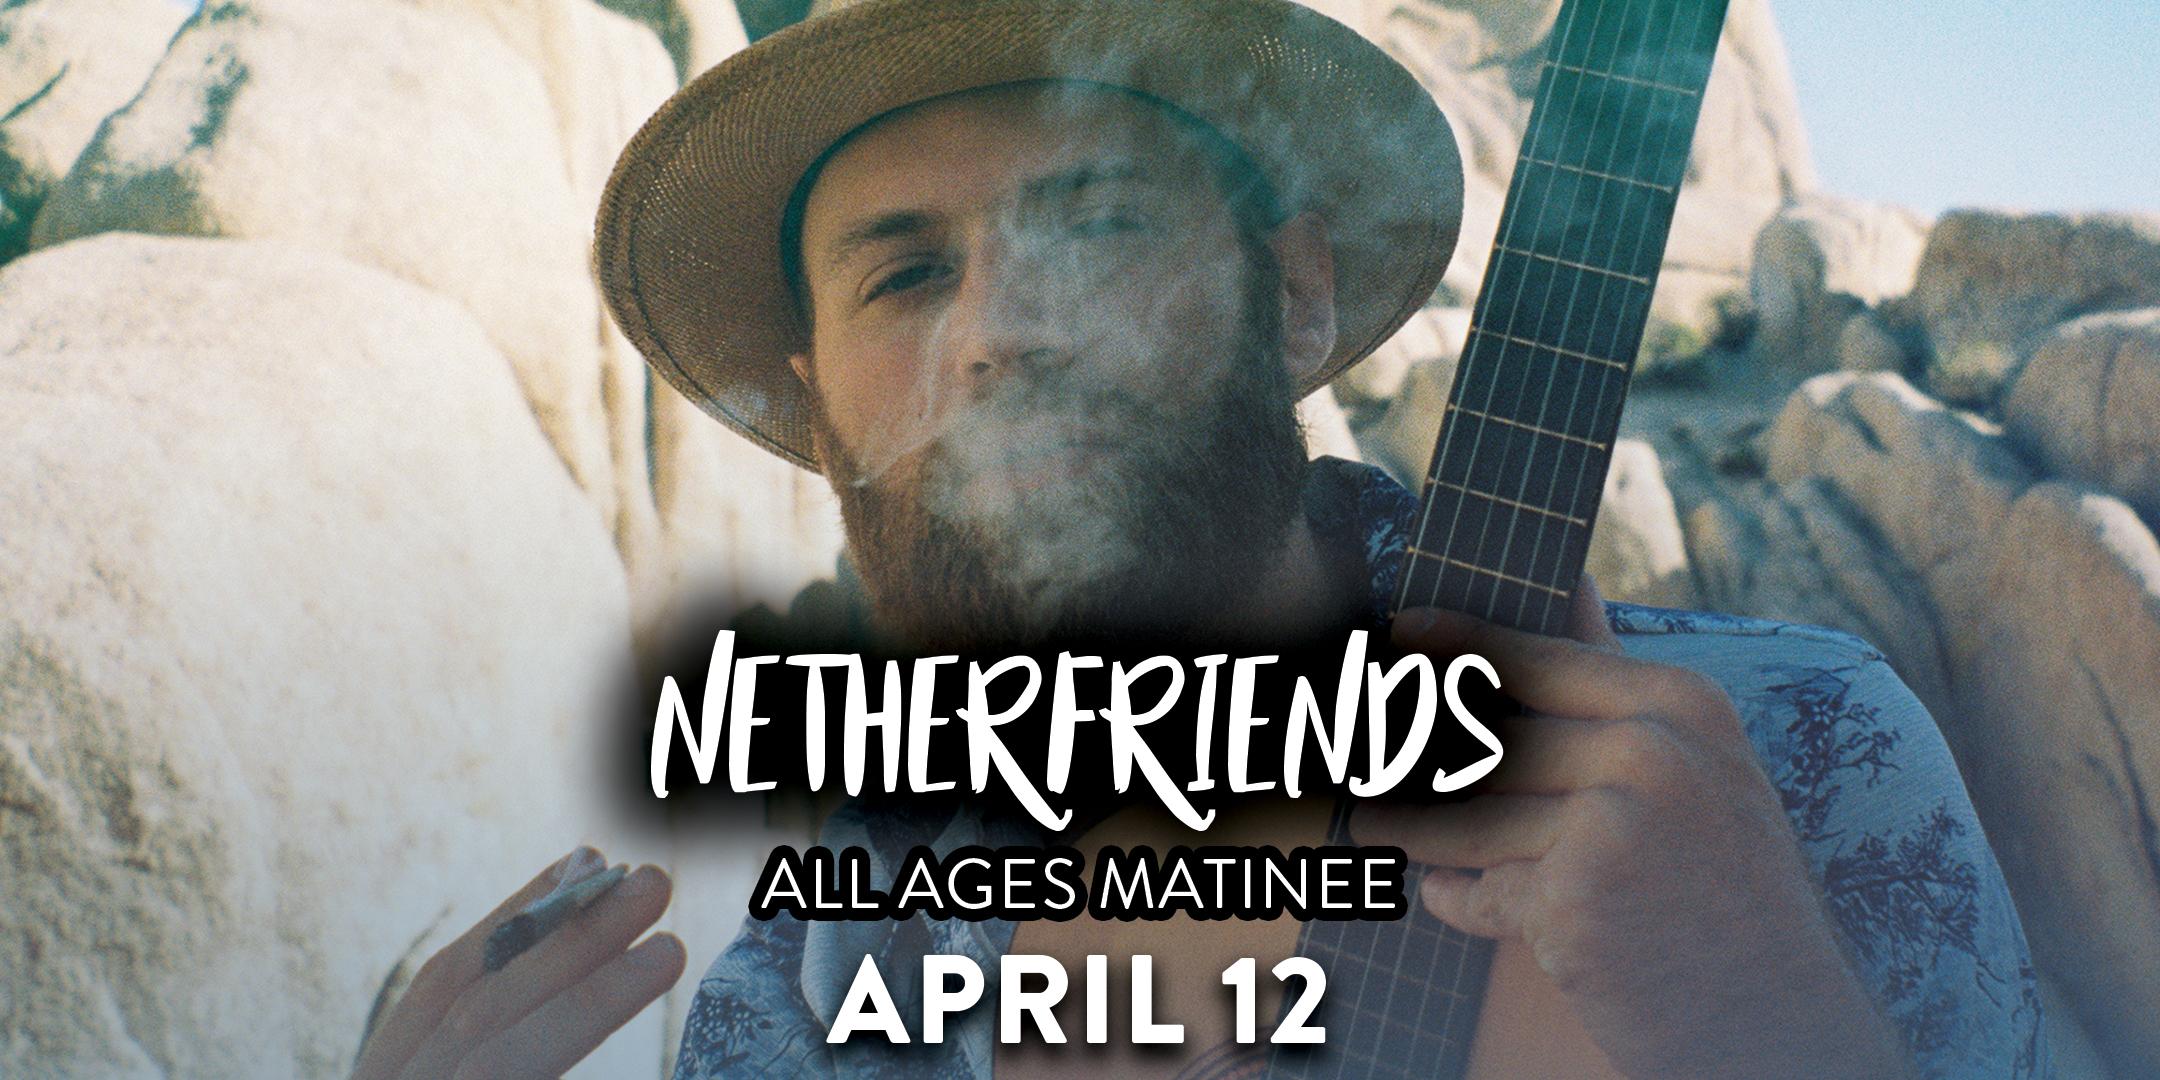 Netherfriends **All Ages Matinee**